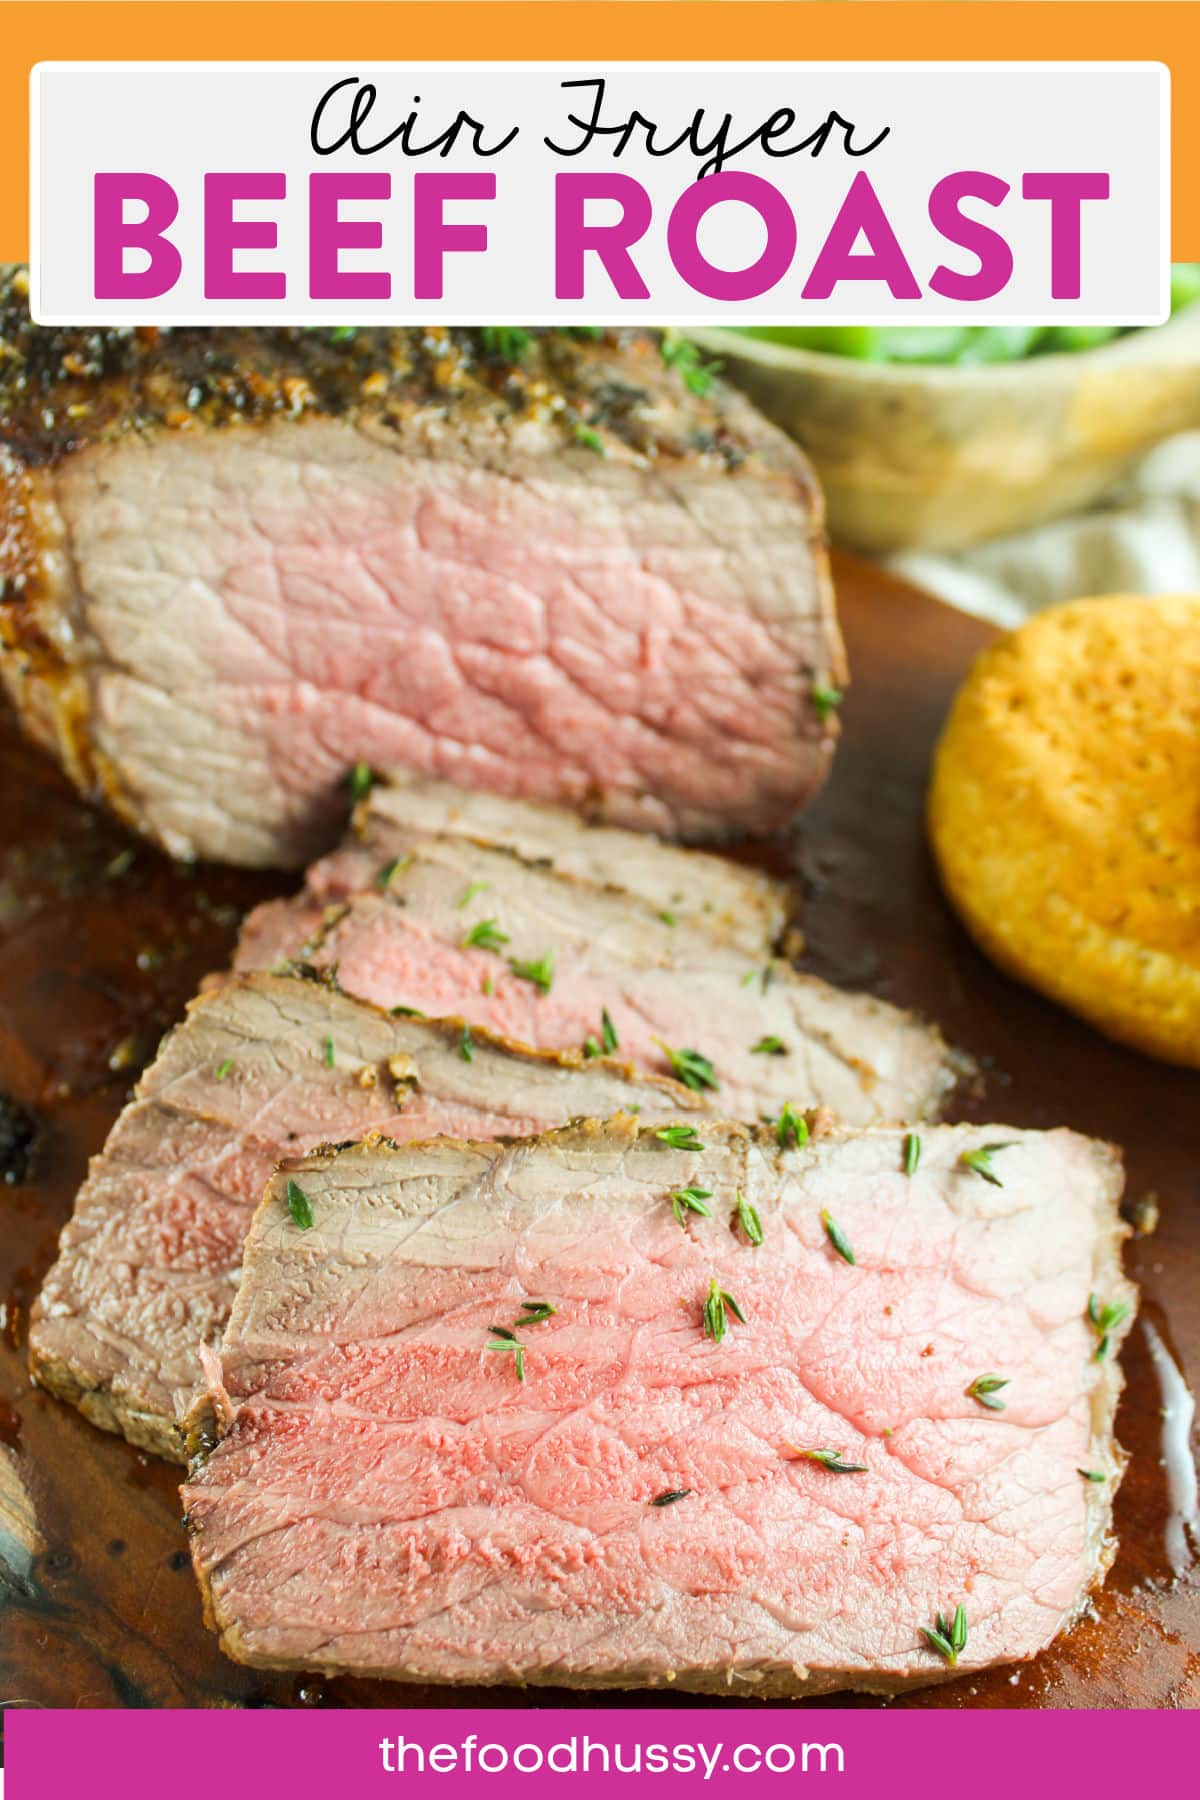 Making a Beef Roast in the Air Fryer will take far less time than in the oven or slow cooker and give you delicious, thin slices of roast beef! The outside has a delicious herbed crust while the inside is a perfect, tender medium rare! via @foodhussy